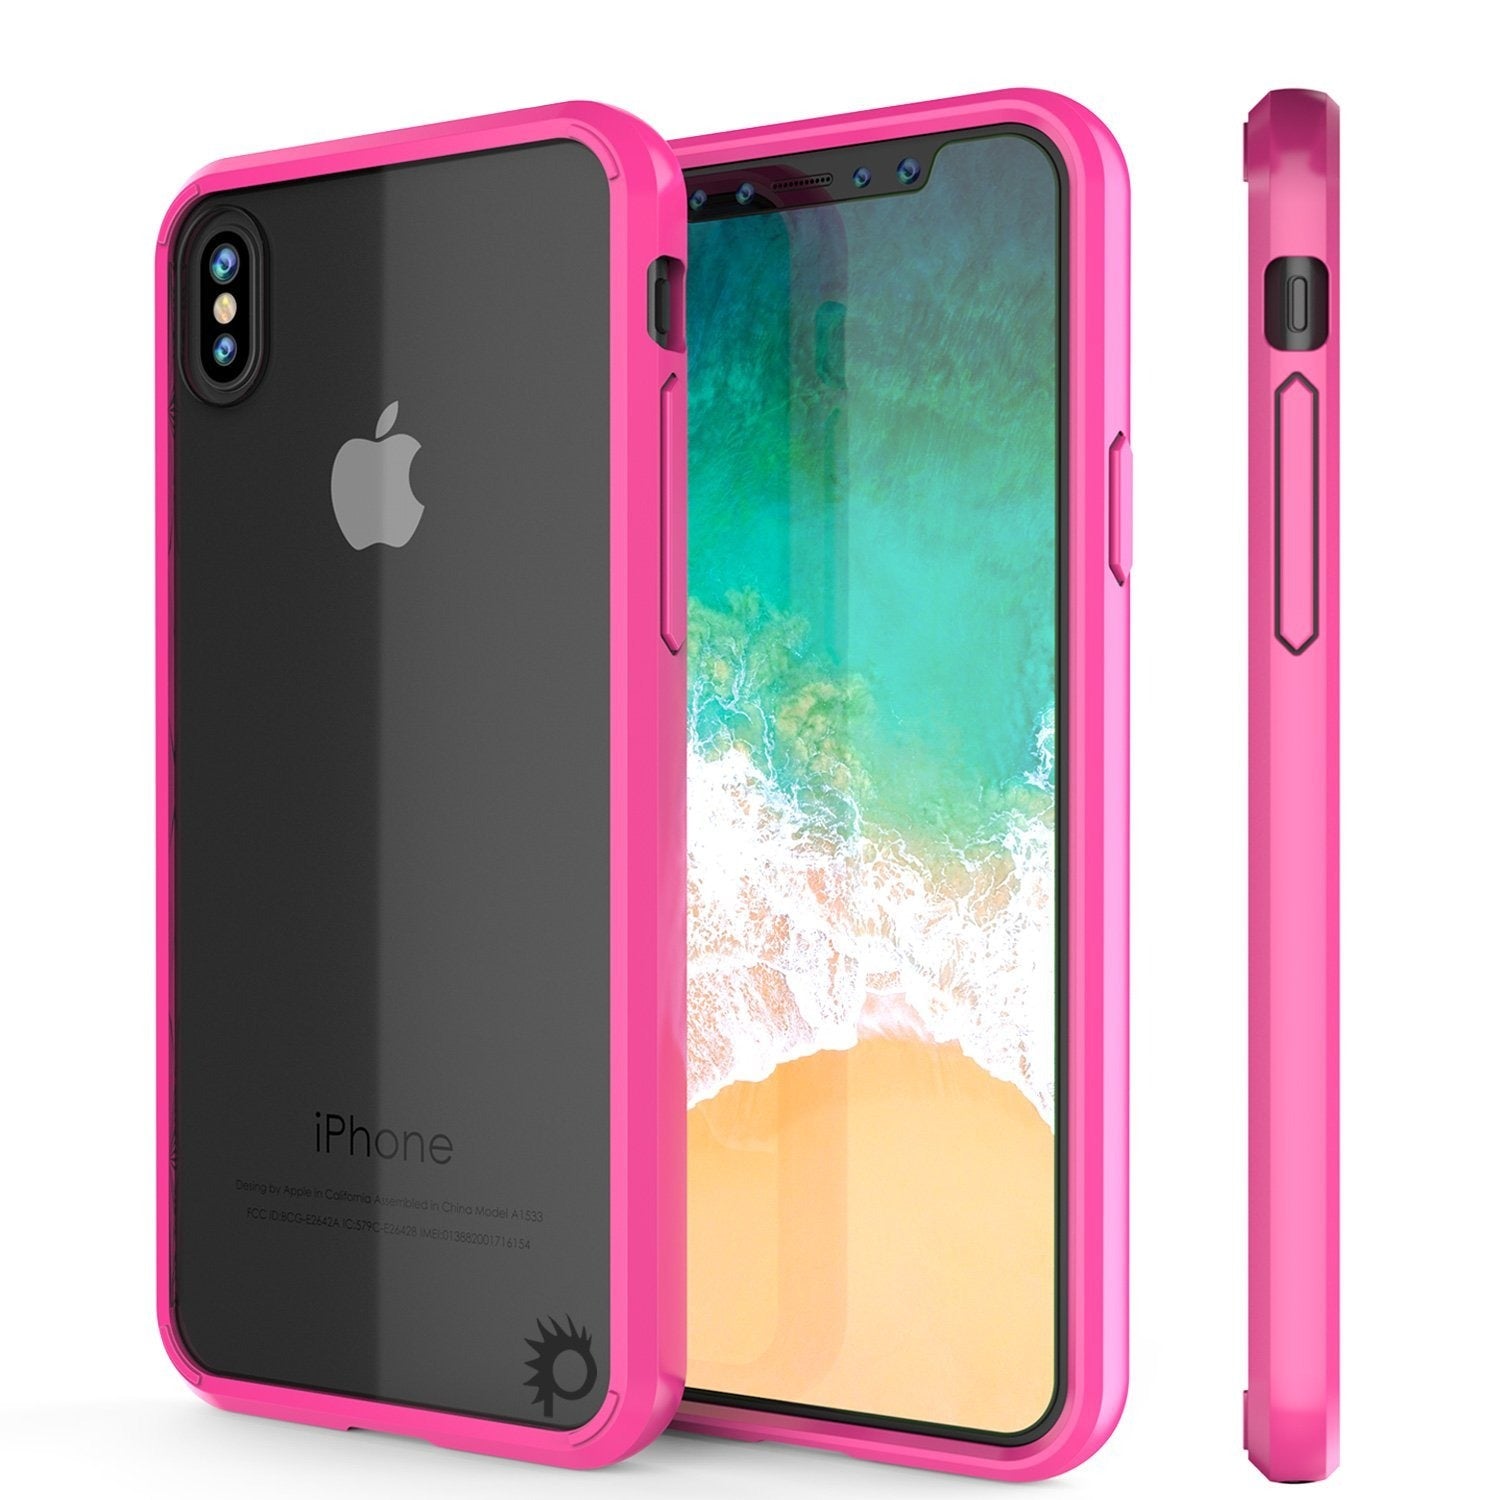 iPhone X Punkcase, [LUCID 2.0 Series] Slim Fit Dual Layer Cover, Pink